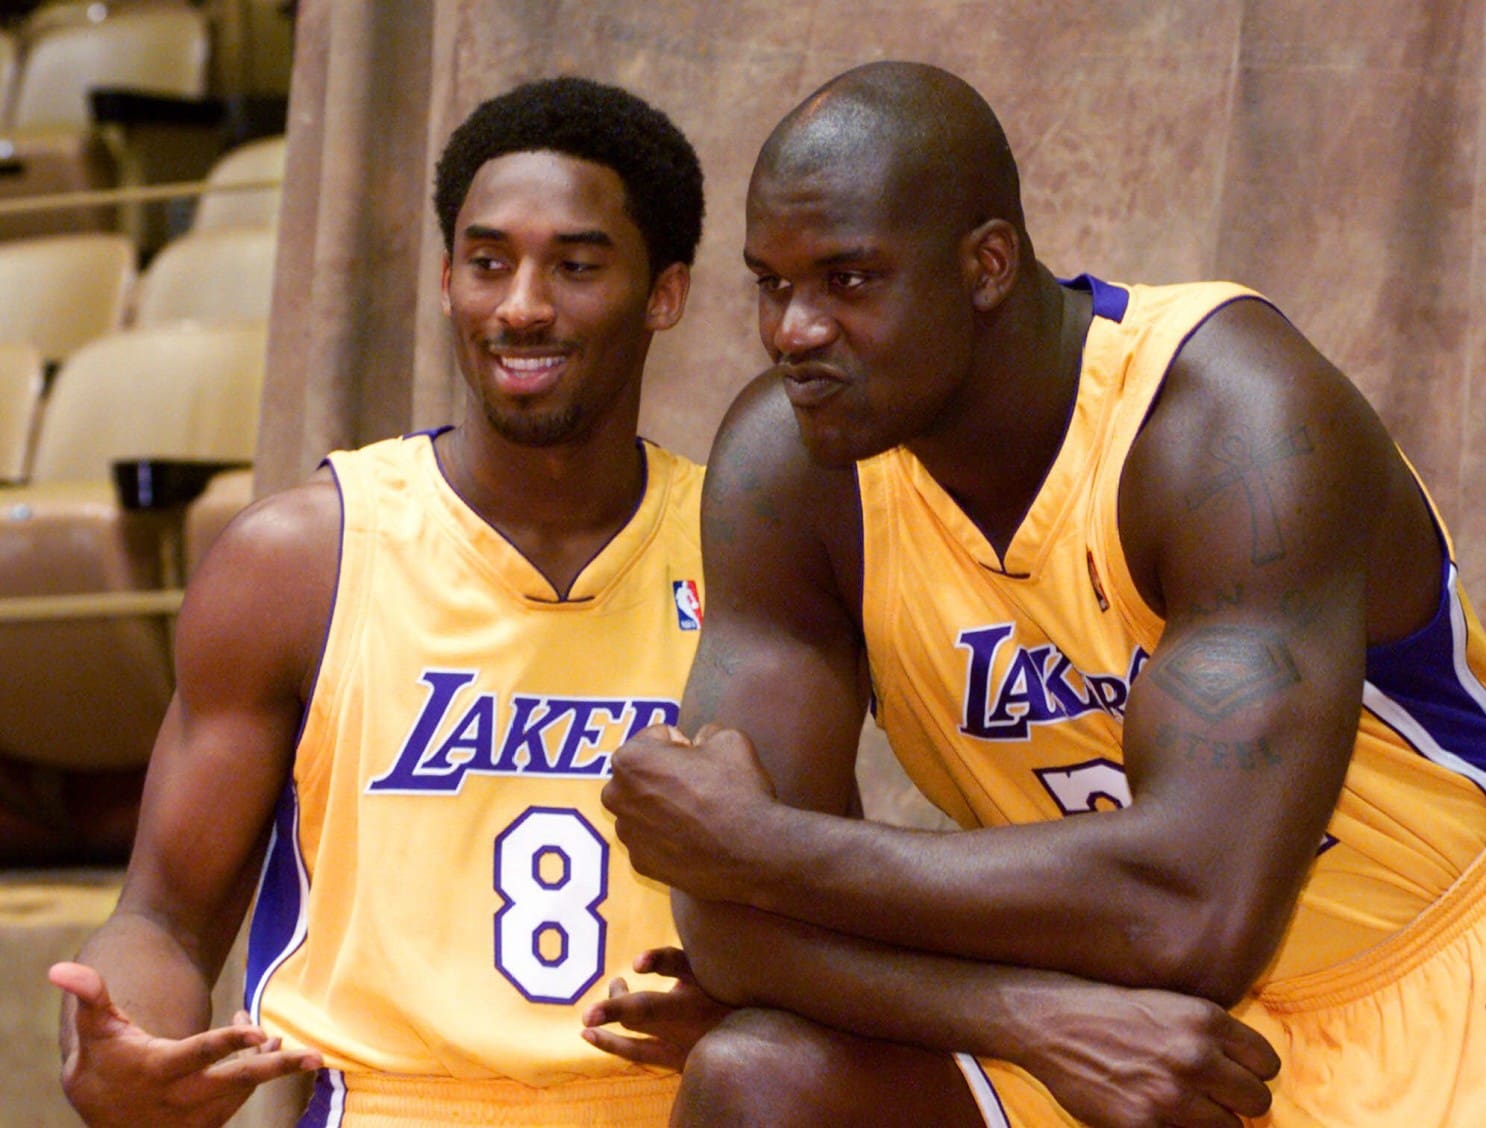 Shaquille O'Neal Joins Dwaye Wade And More In A Special Tribute Program Honouring Kobe Bryant